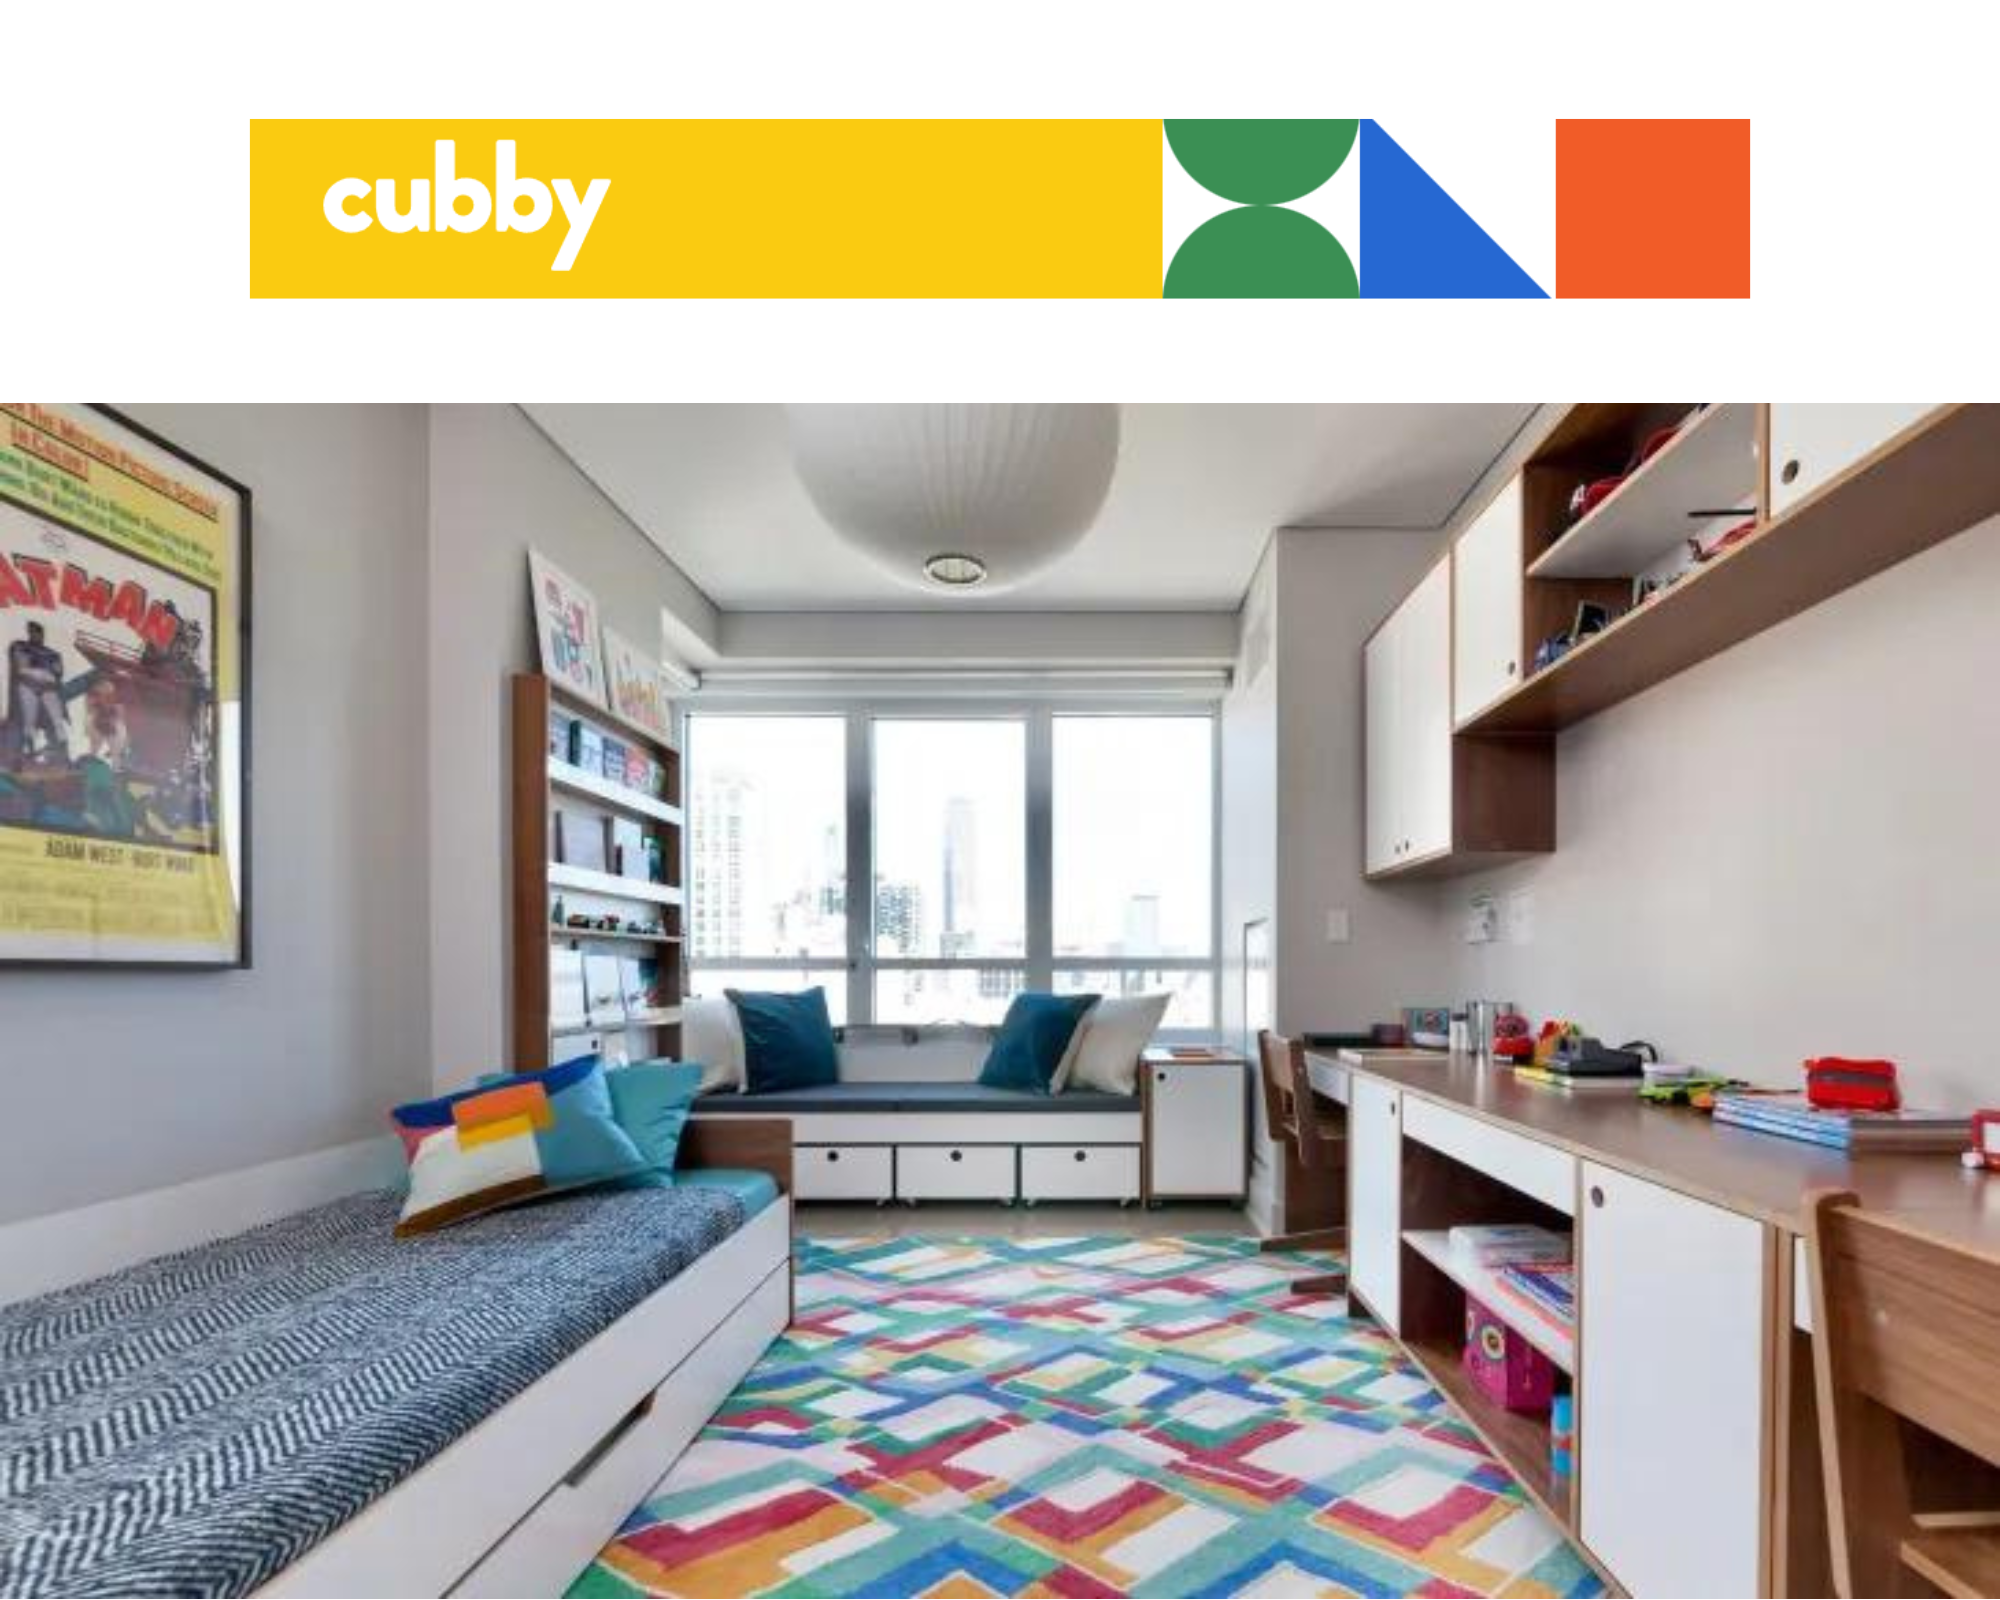 Bright child's room with colorful rug, window seat, study desk, and beds; "cubby" logo in the corner.